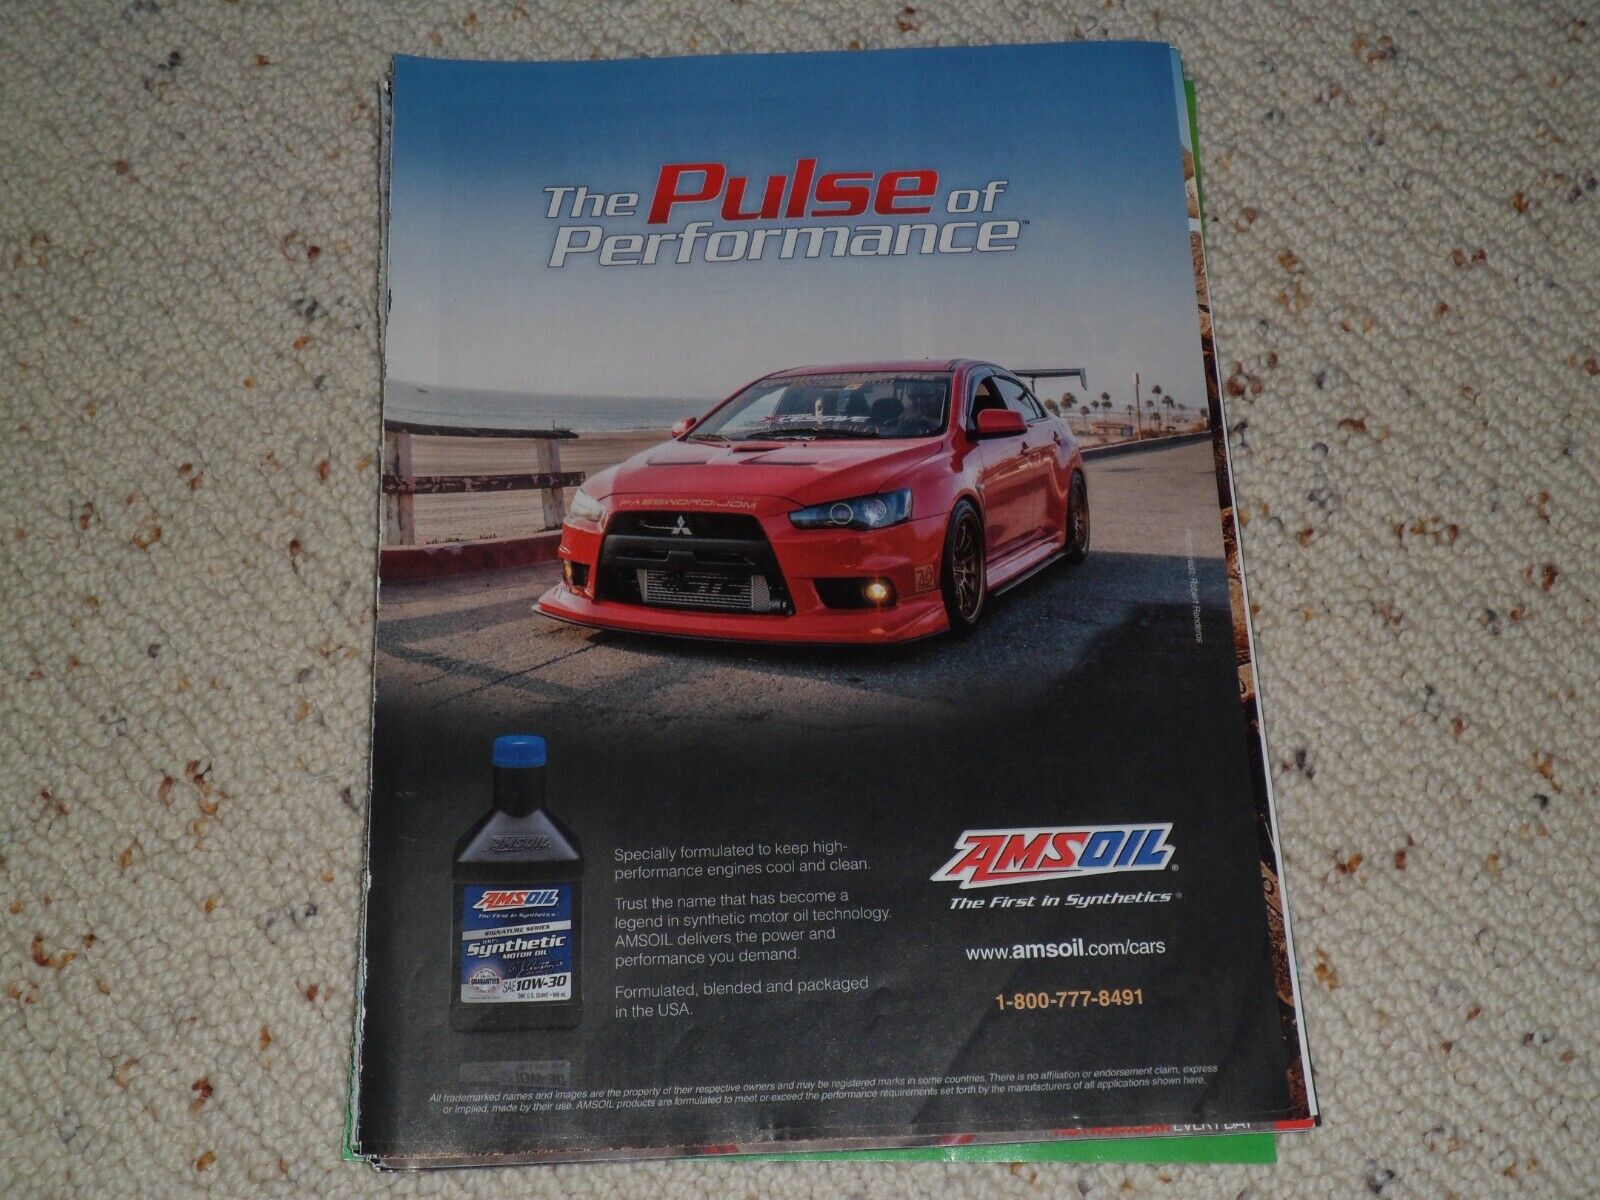 2015 AMSOIL AD / ARTICLE